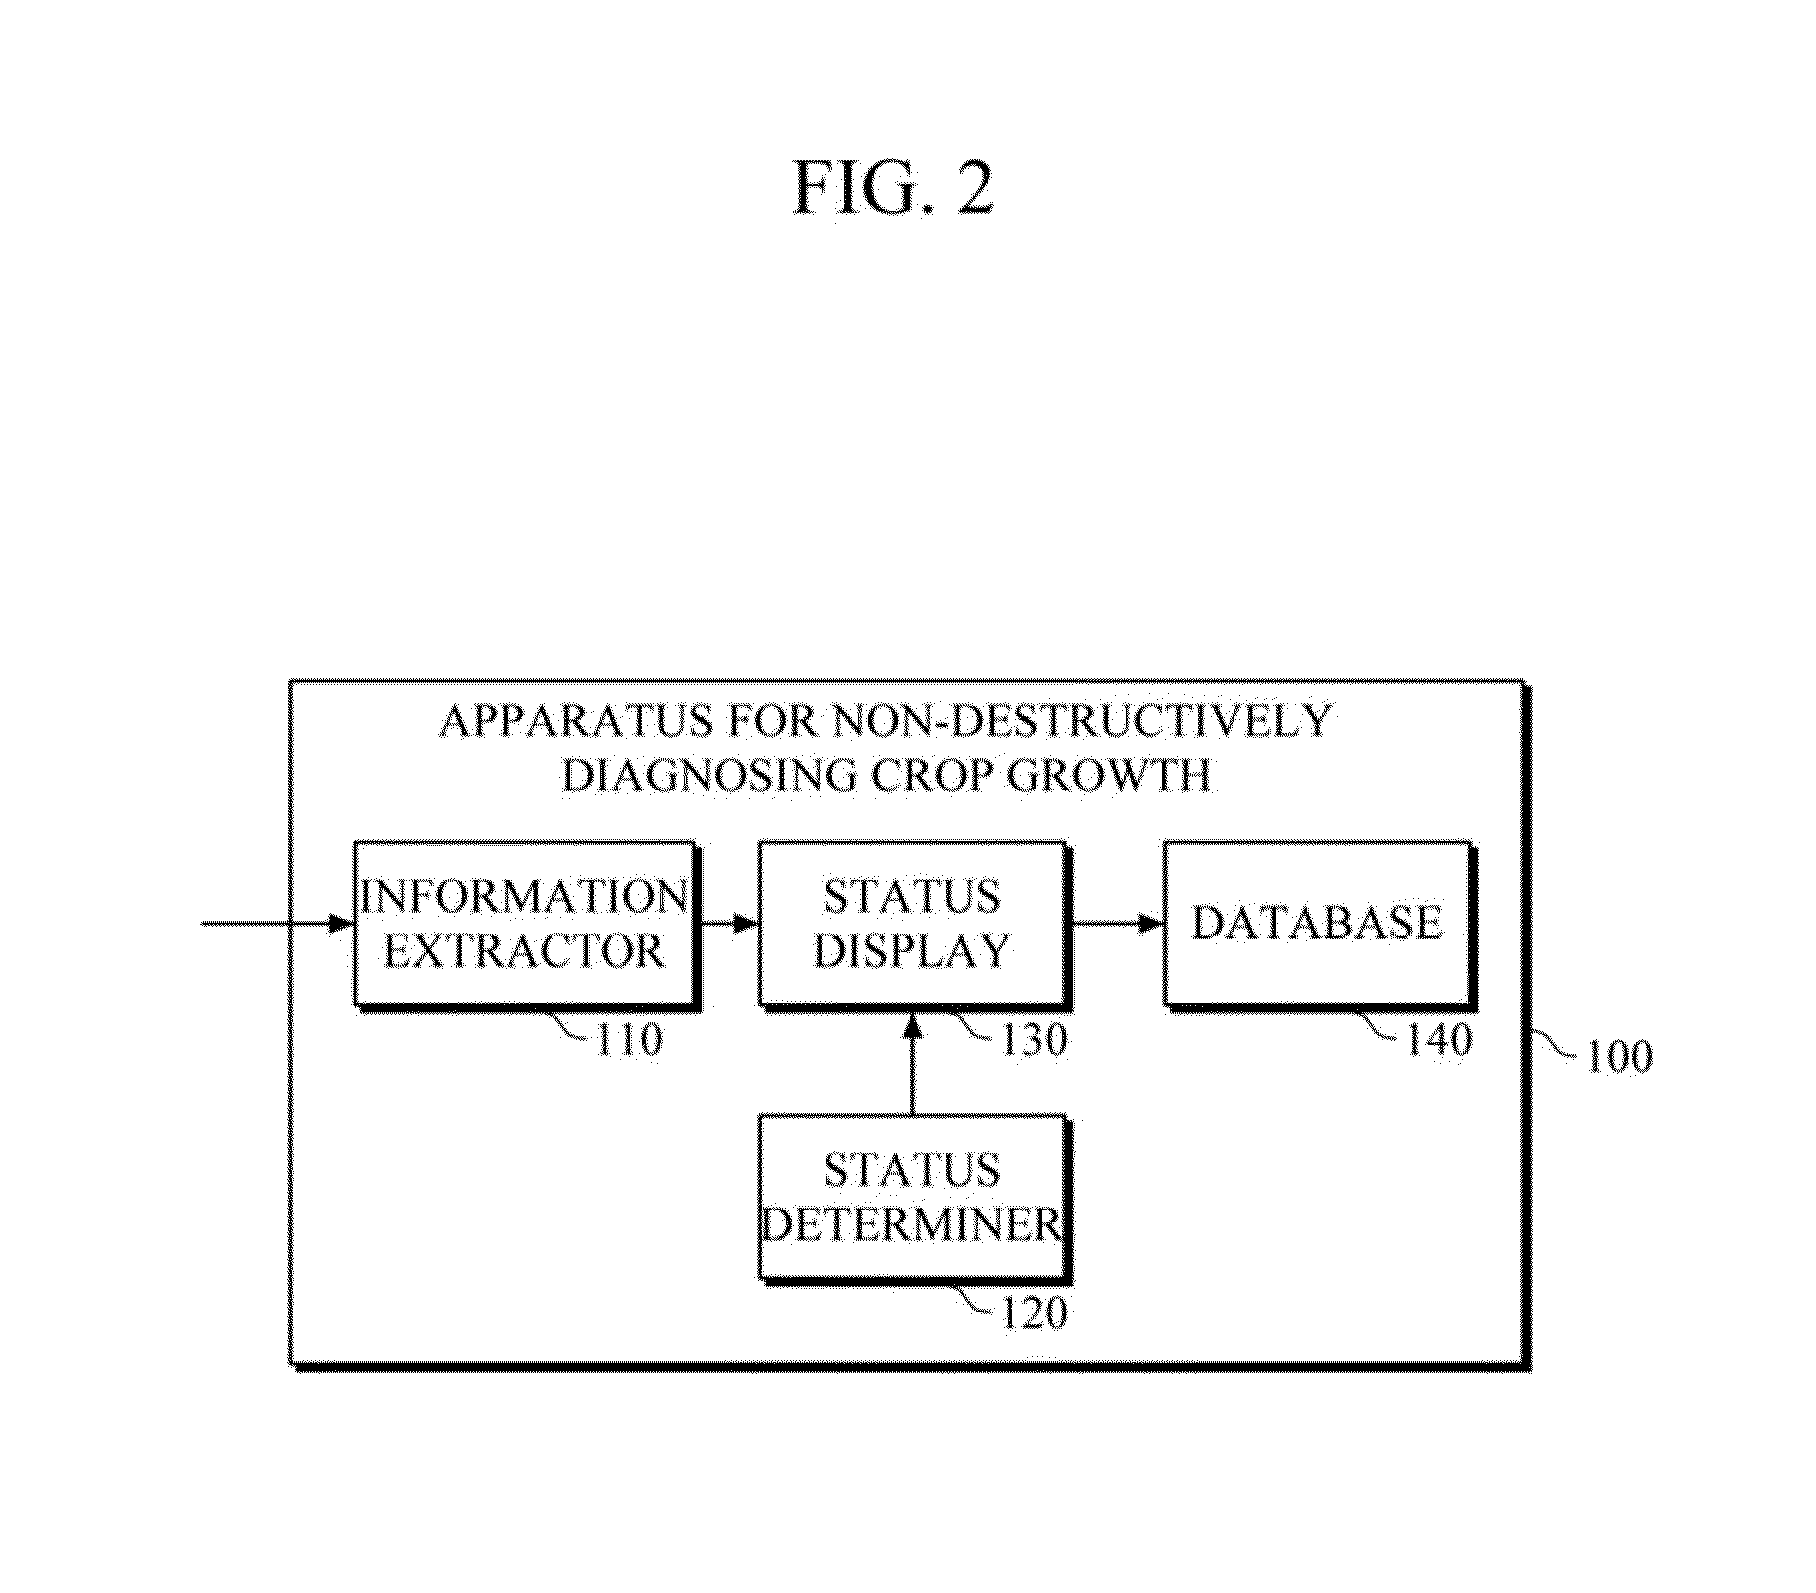 Apparatus and method for non-destructively diagnosing crop growth using terahertz waves